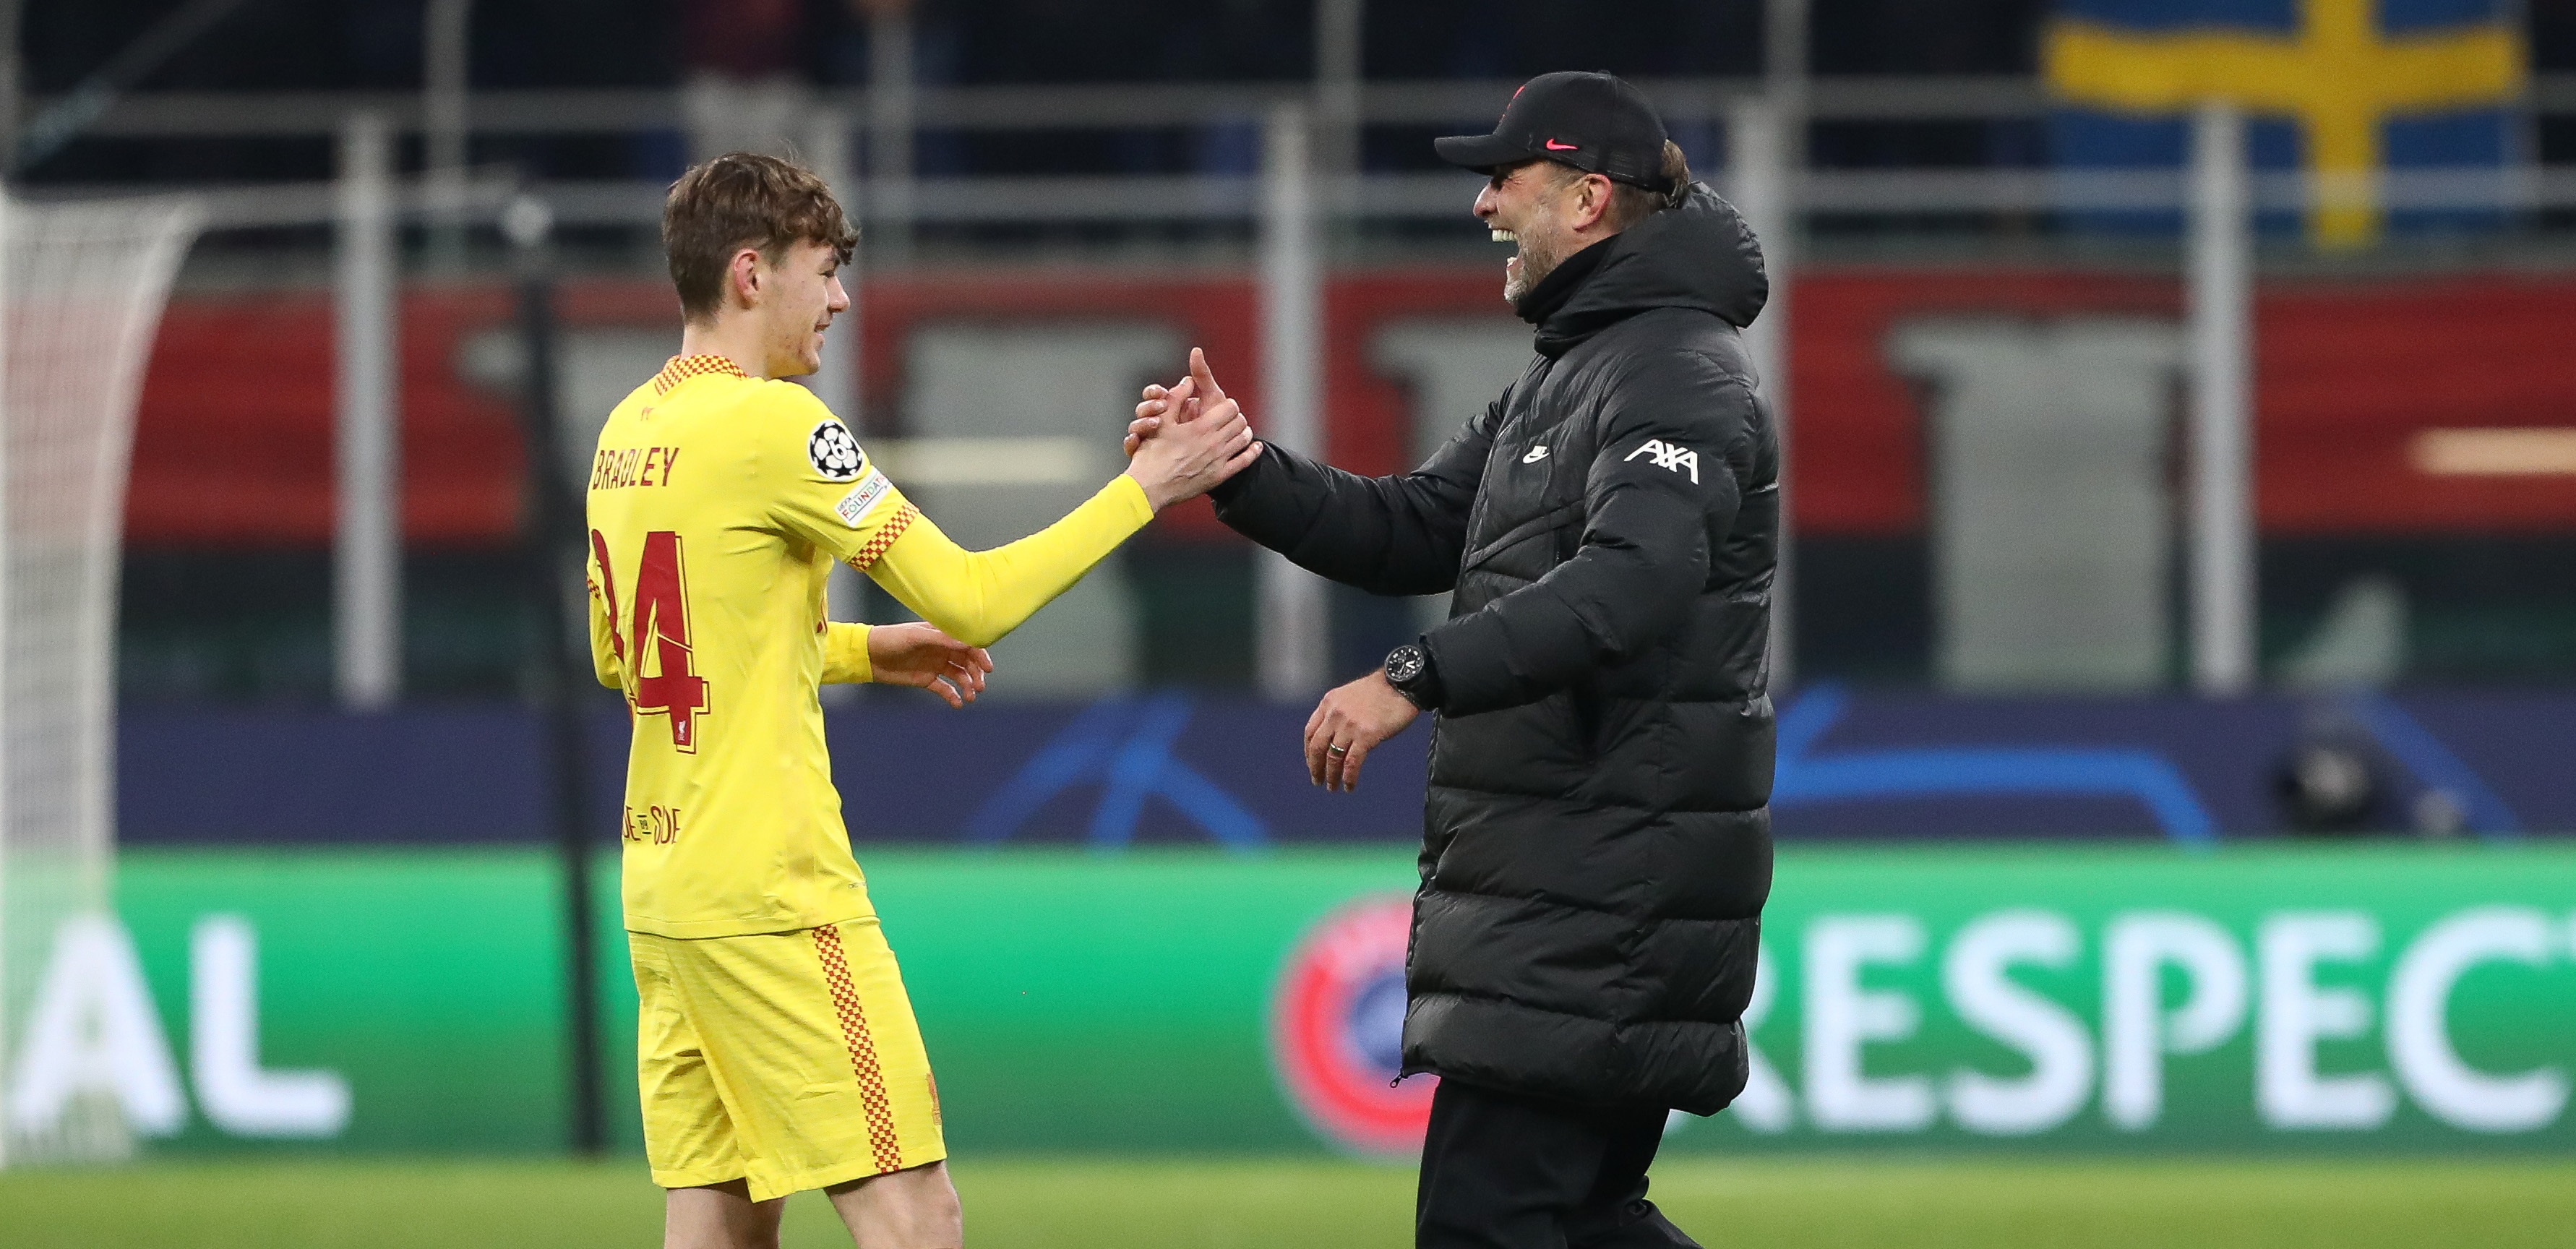 Bolton Wanderers interested in 18-year-old Liverpool full-back with the possibility of a transfer nearing a ‘positive conclusion’ – report